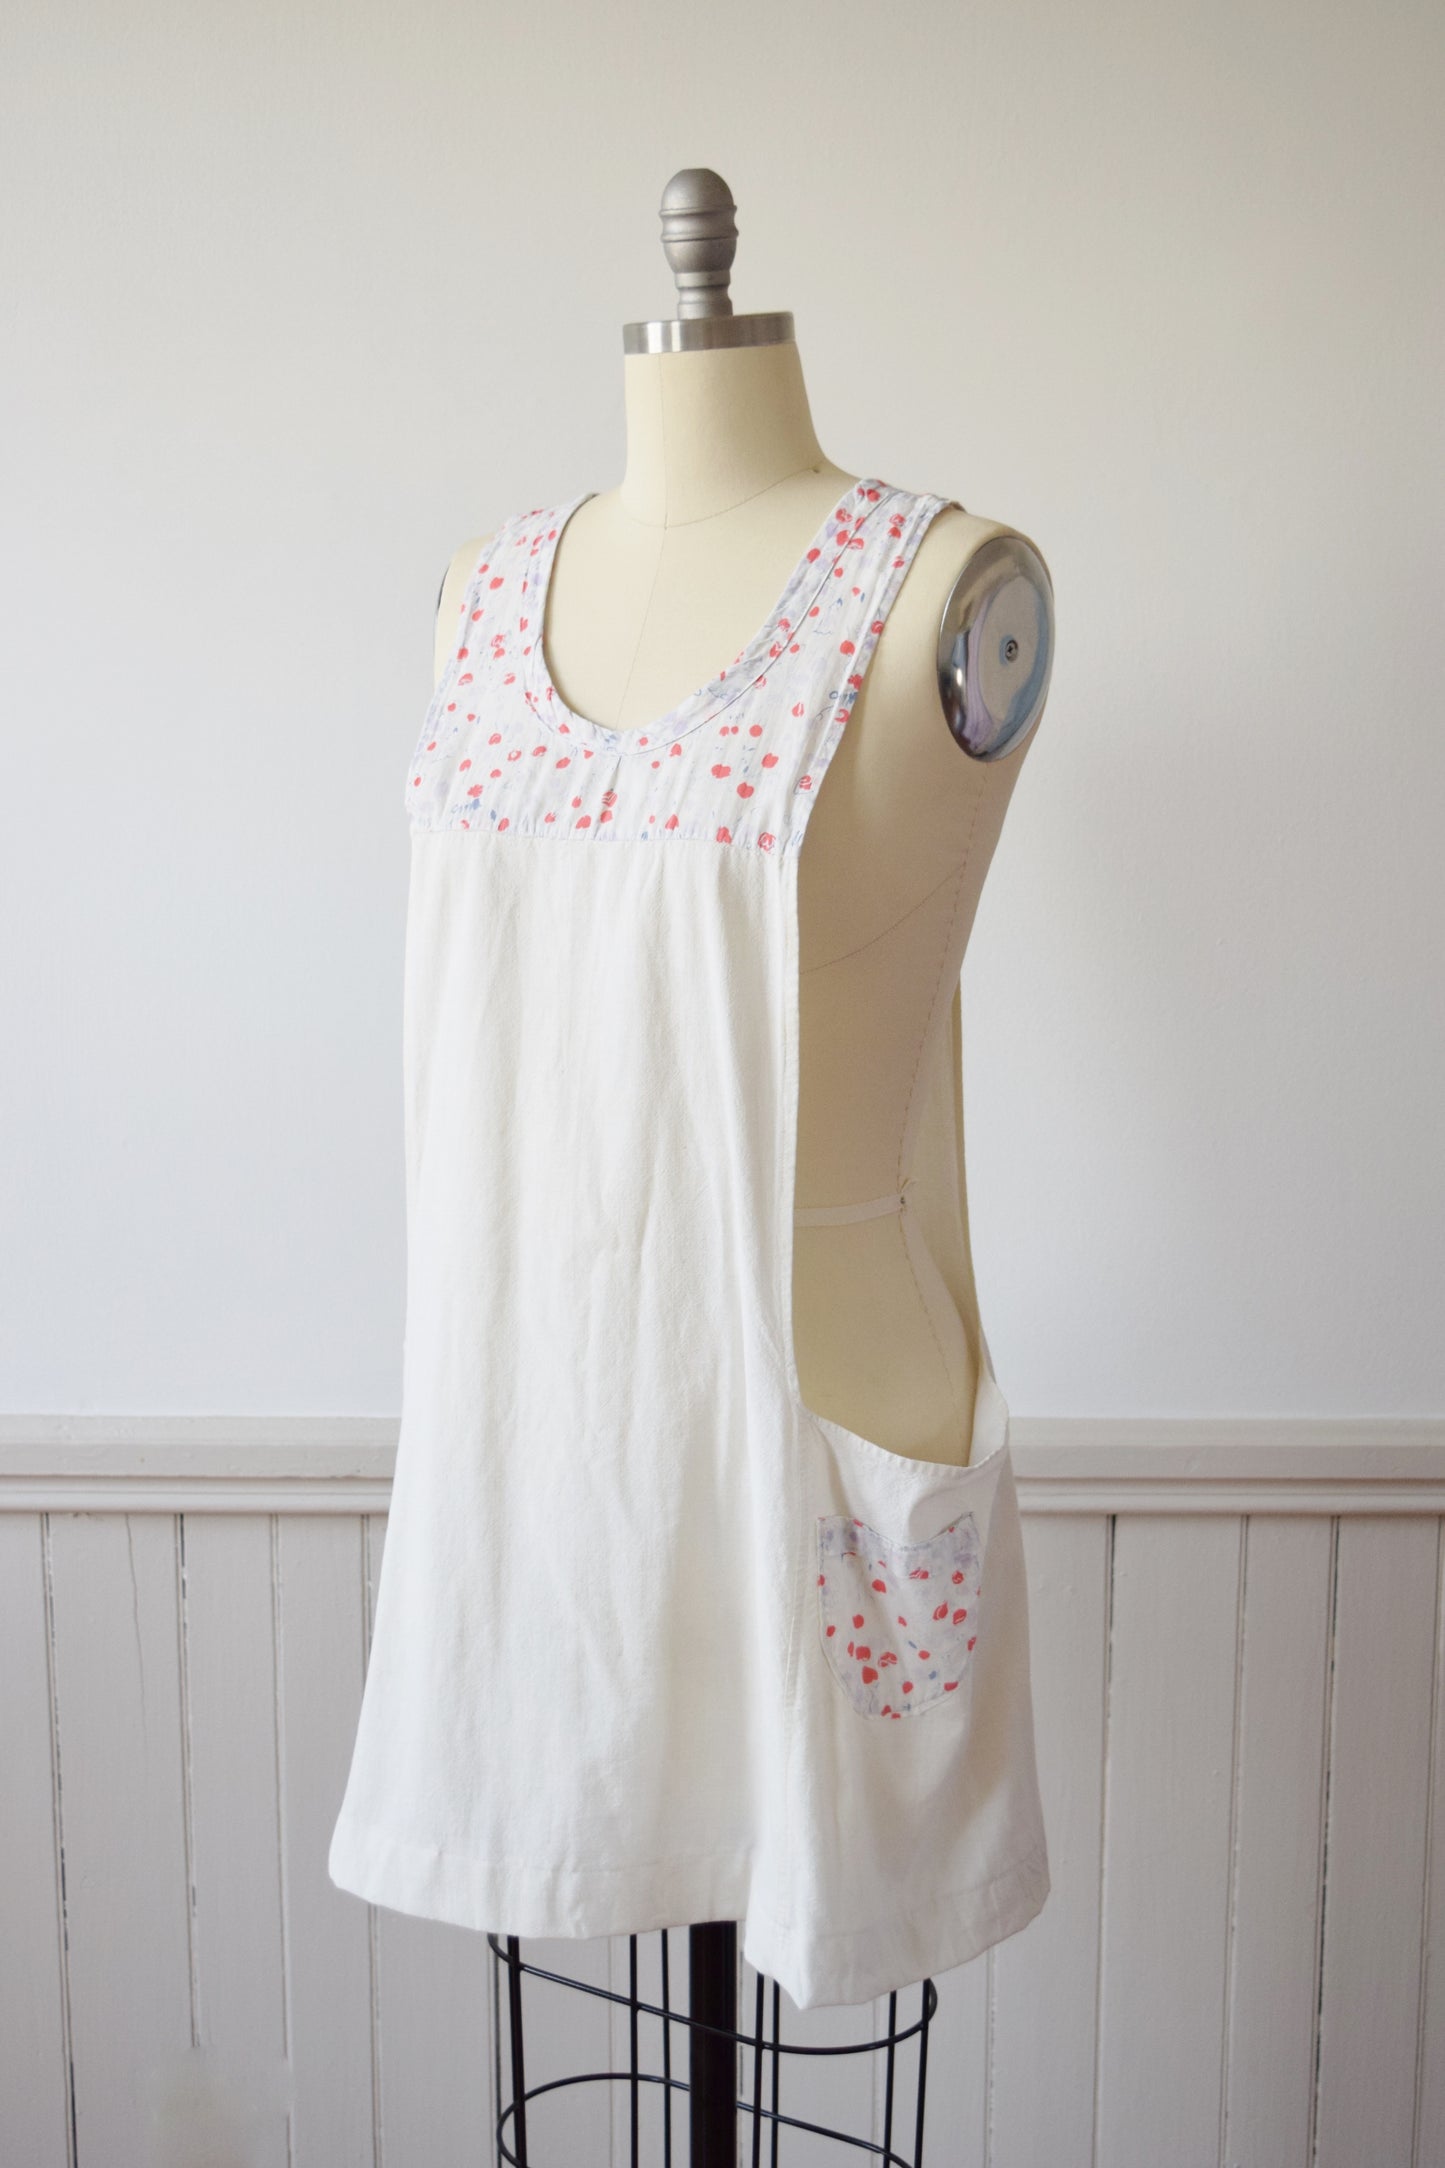 1920s Smock | Apron with Novelty Print Accents